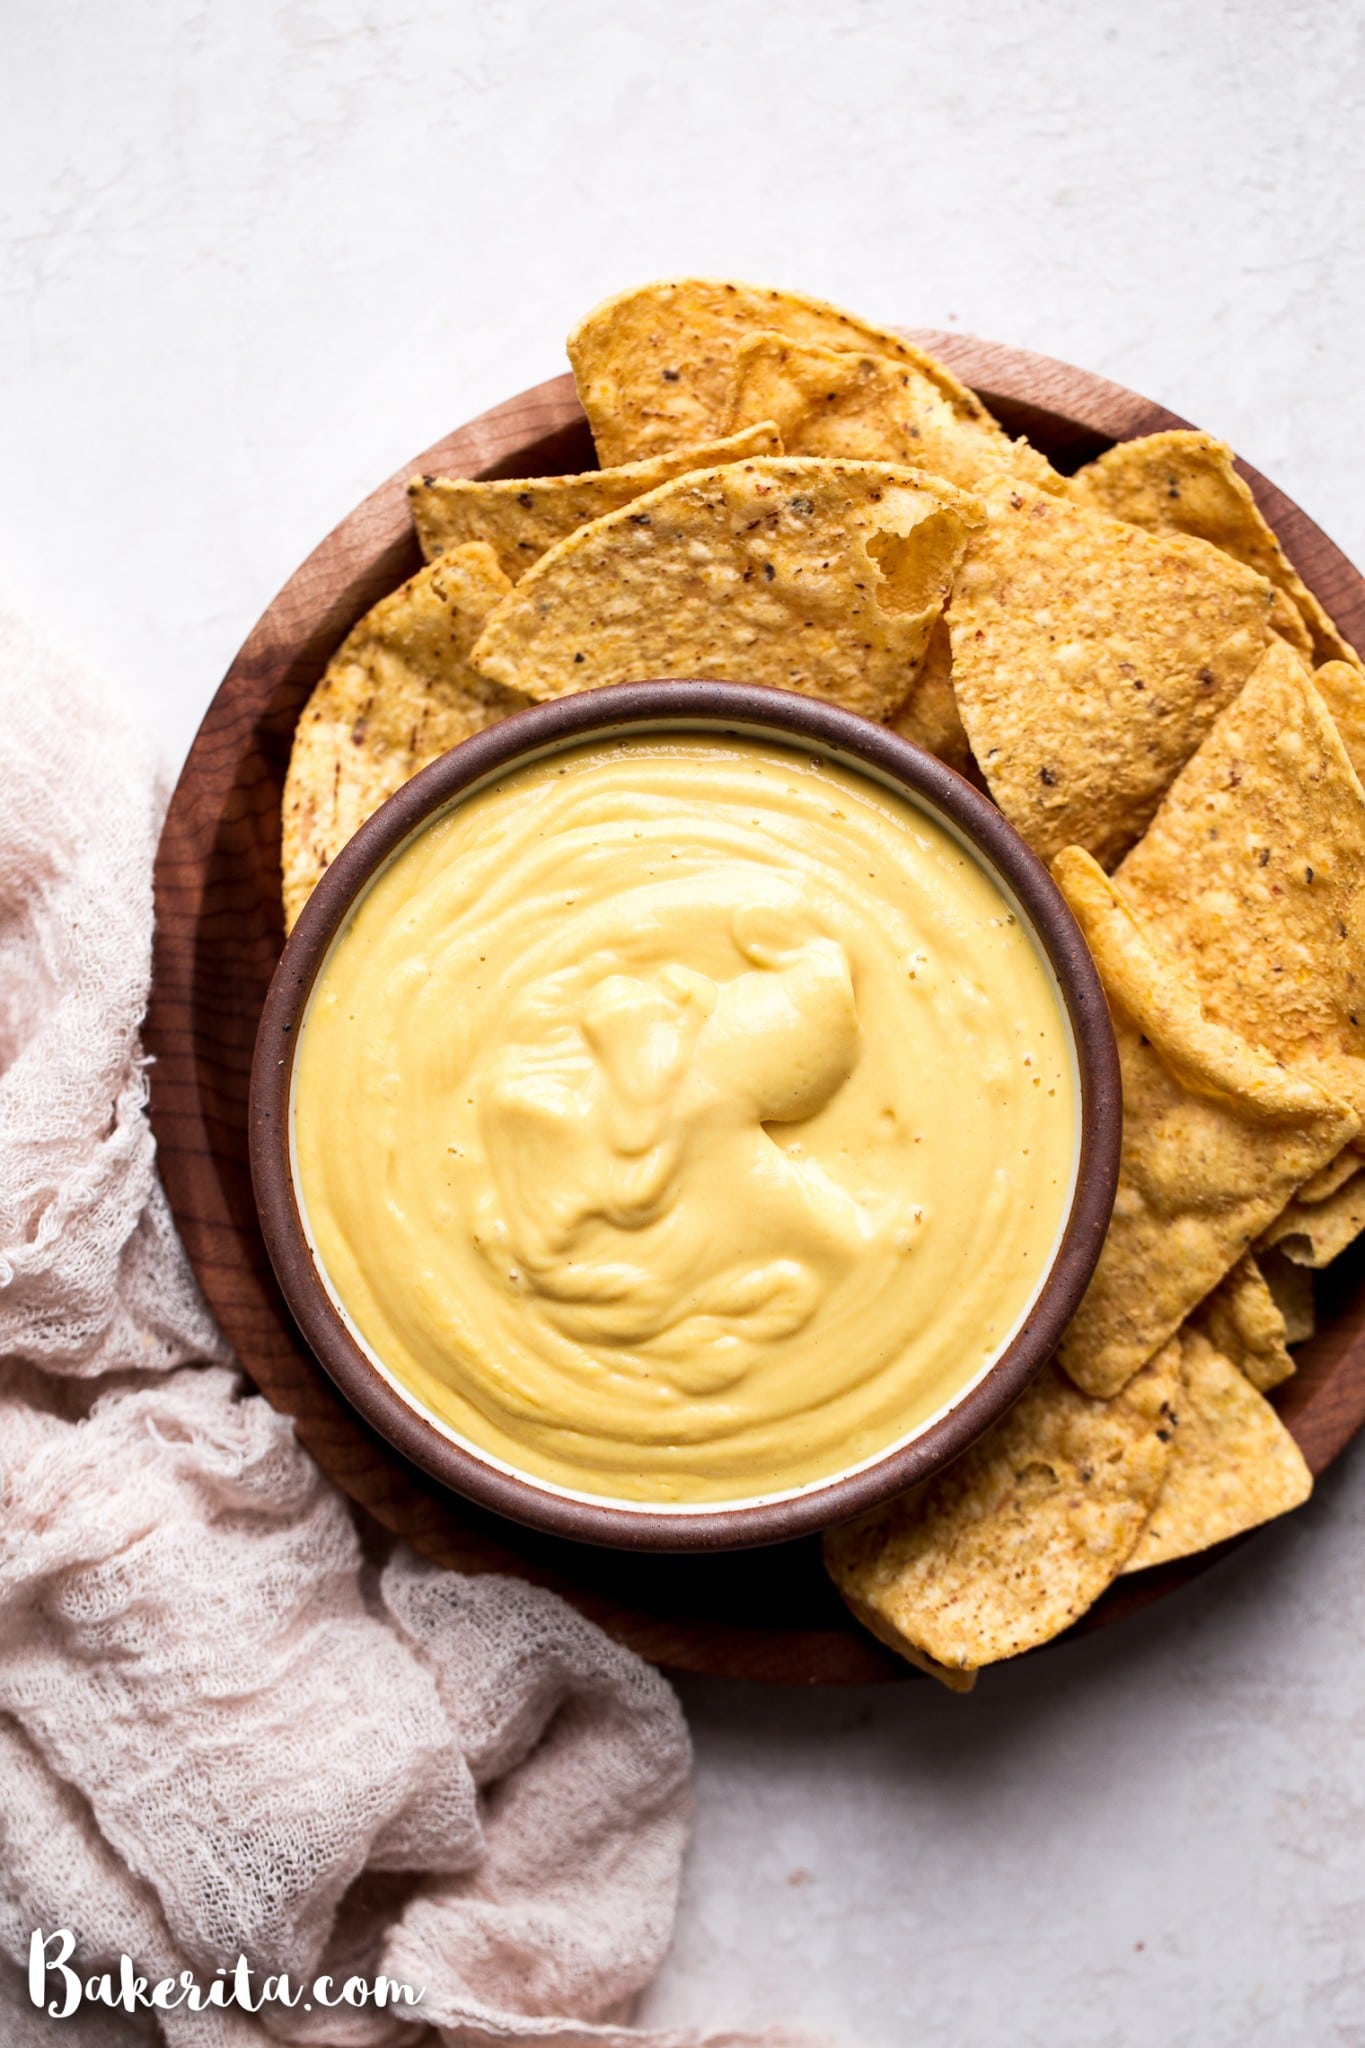 This Vegan Cheese Sauce recipe is easy to make and tastes good on just about everything! It's made with vegetables and cashews for an oil-free, dairy-free cheese sauce. You'll love it with pasta or vegetables, on nachos, and taco bowls, or used as a dip with chips or veggies.